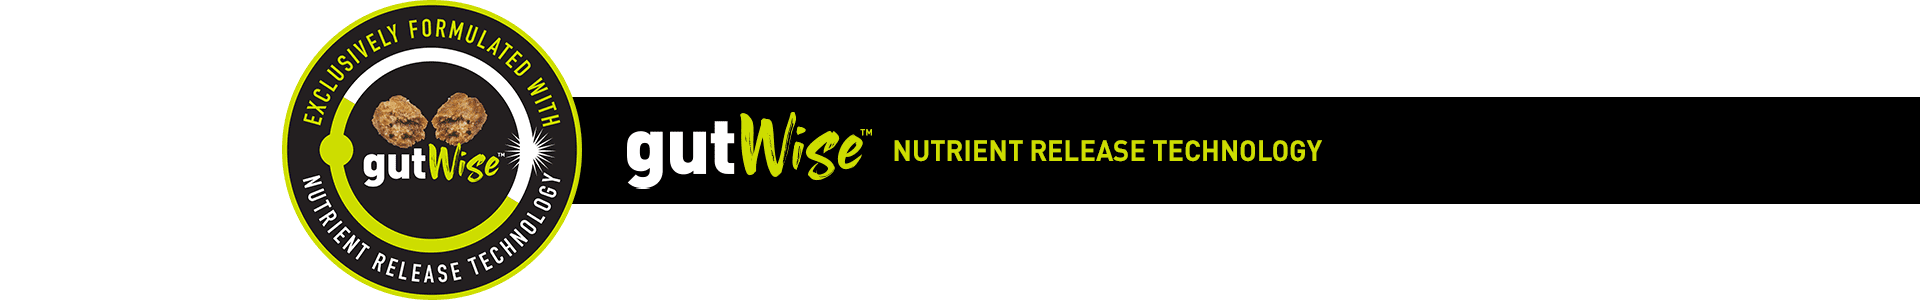 gutWise Nutrient Release Technology heading